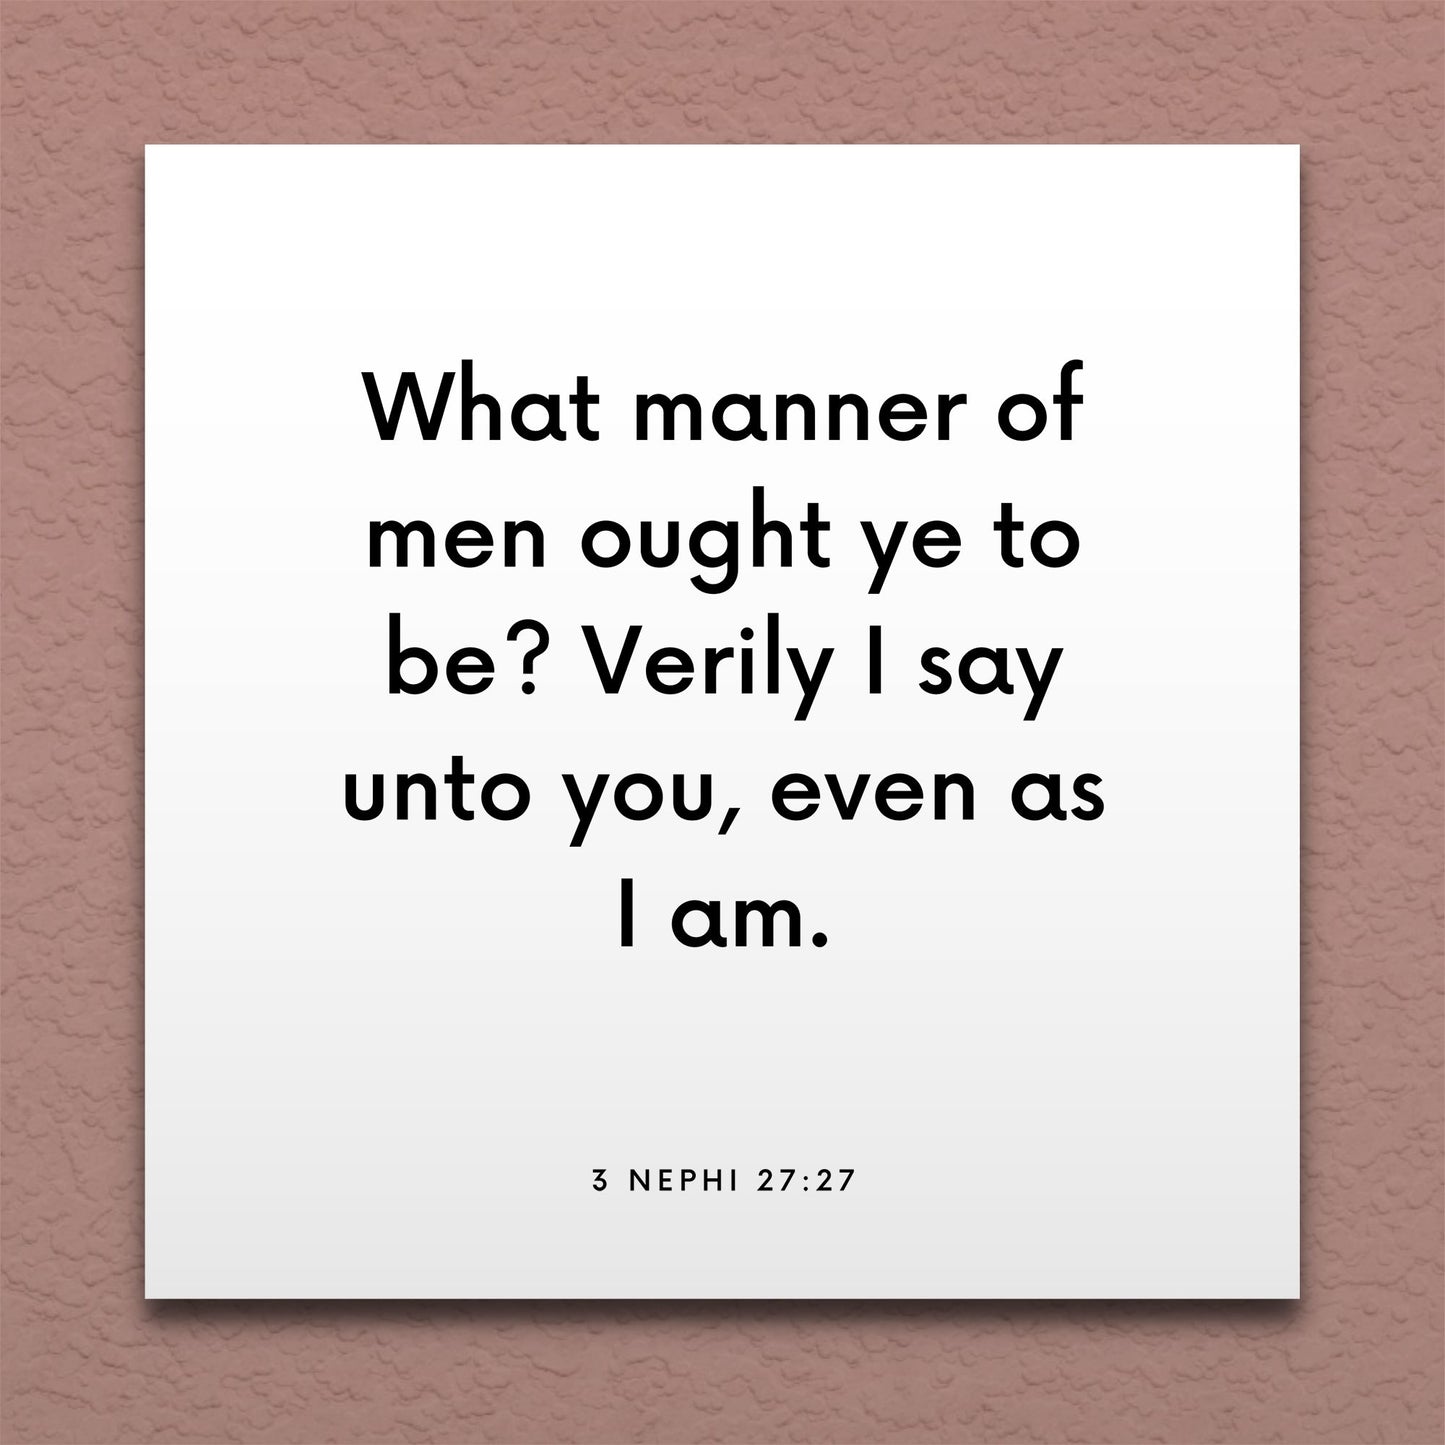 Wall-mounted scripture tile for 3 Nephi 27:27 - "What manner of men ought ye to be?"